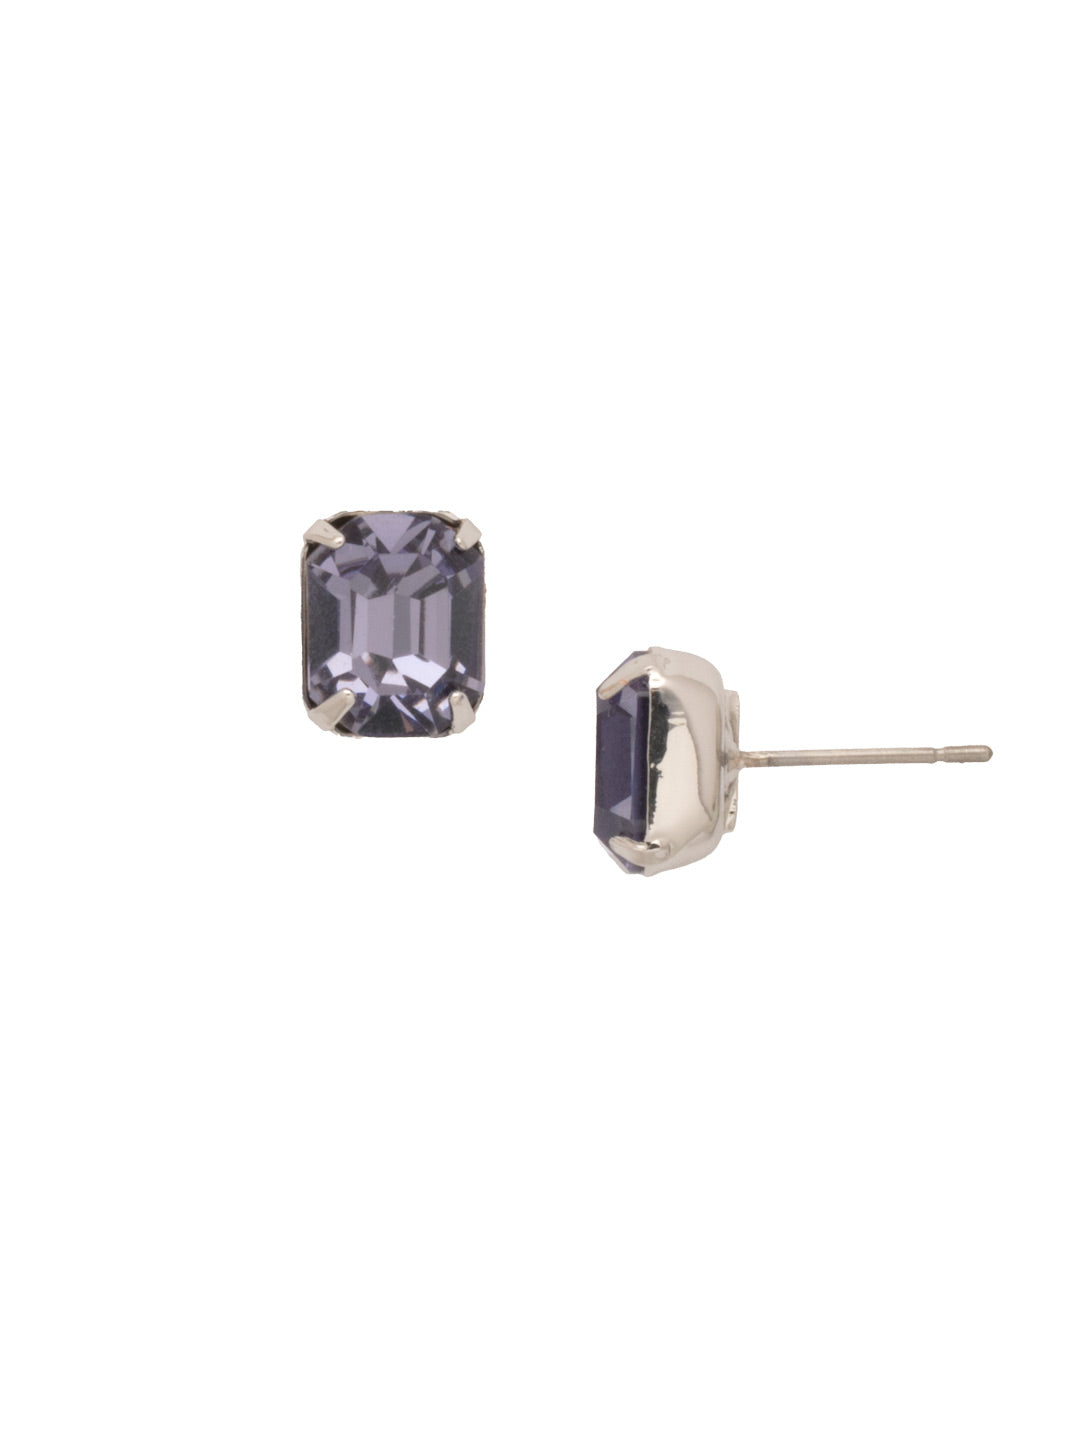 Octavia Stud Earrings - EDU53PDTZ - <p>These rounded emerald cut stud earrings can be worn alone or paired with anything for just a bit of extra bling! From Sorrelli's Tanzanite Crystal collection in our Palladium finish.</p>